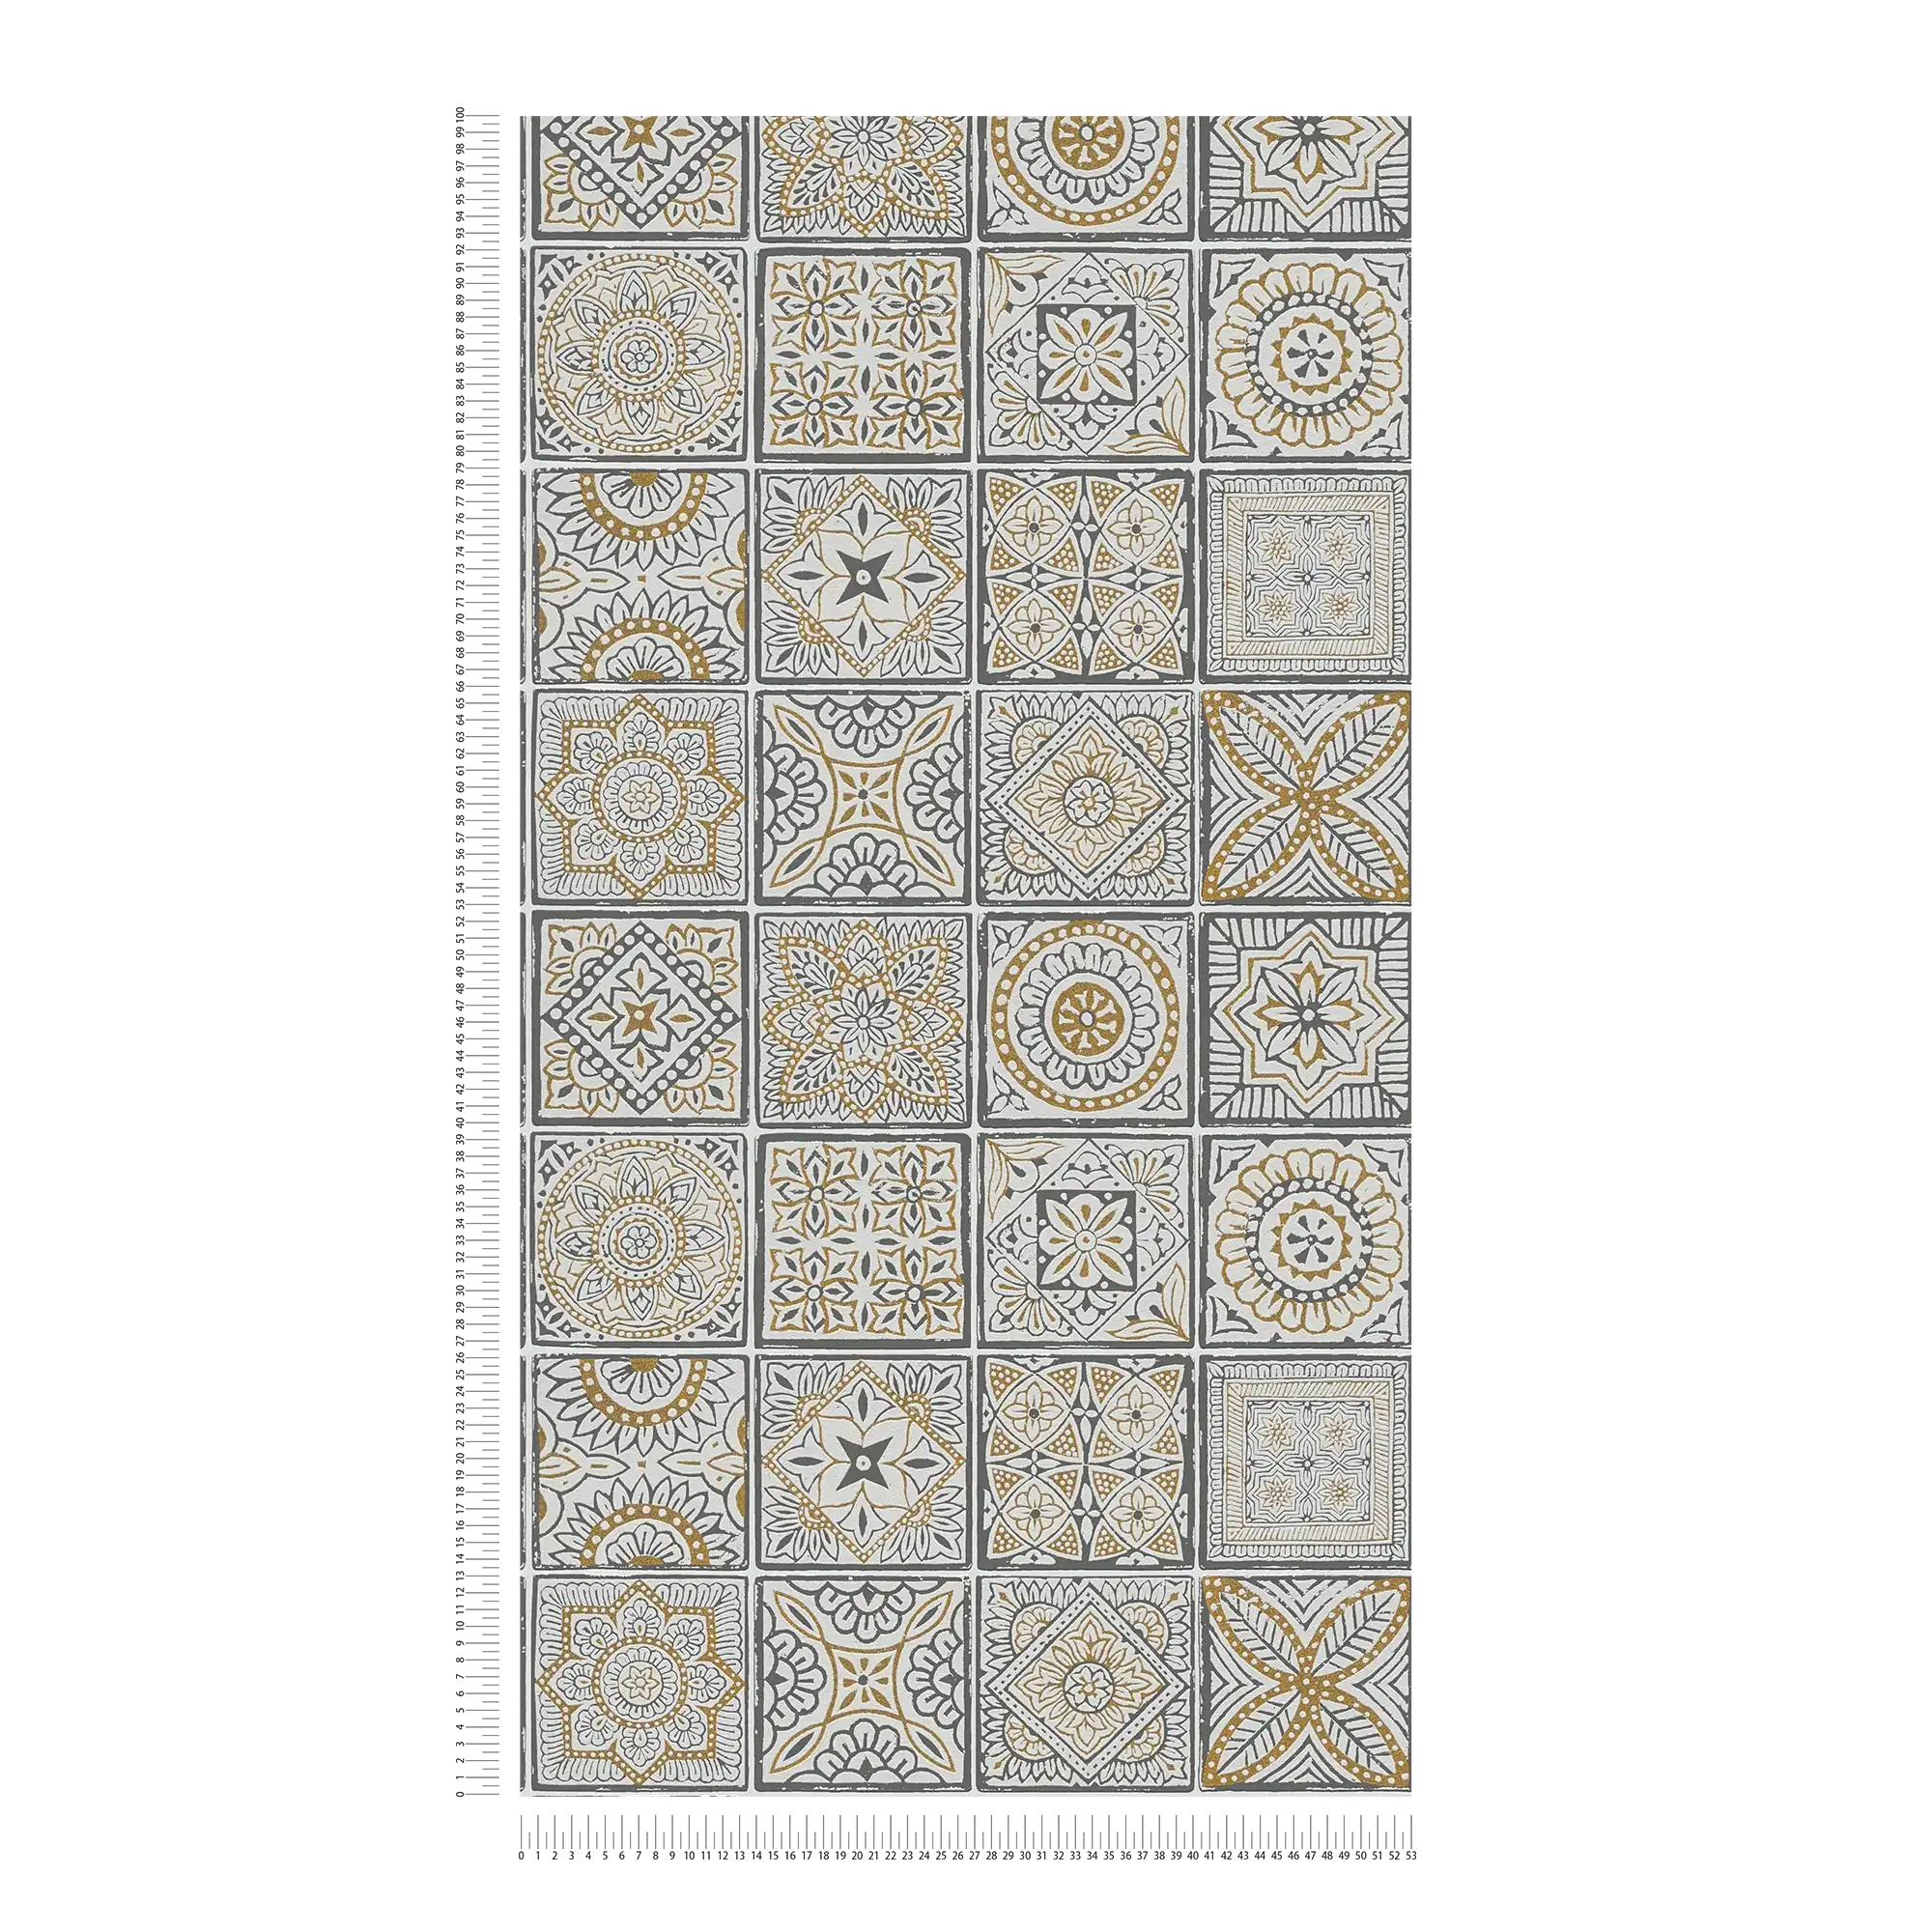             Floral non-woven wallpaper with tiles and mosaic look - gold, white, black
        